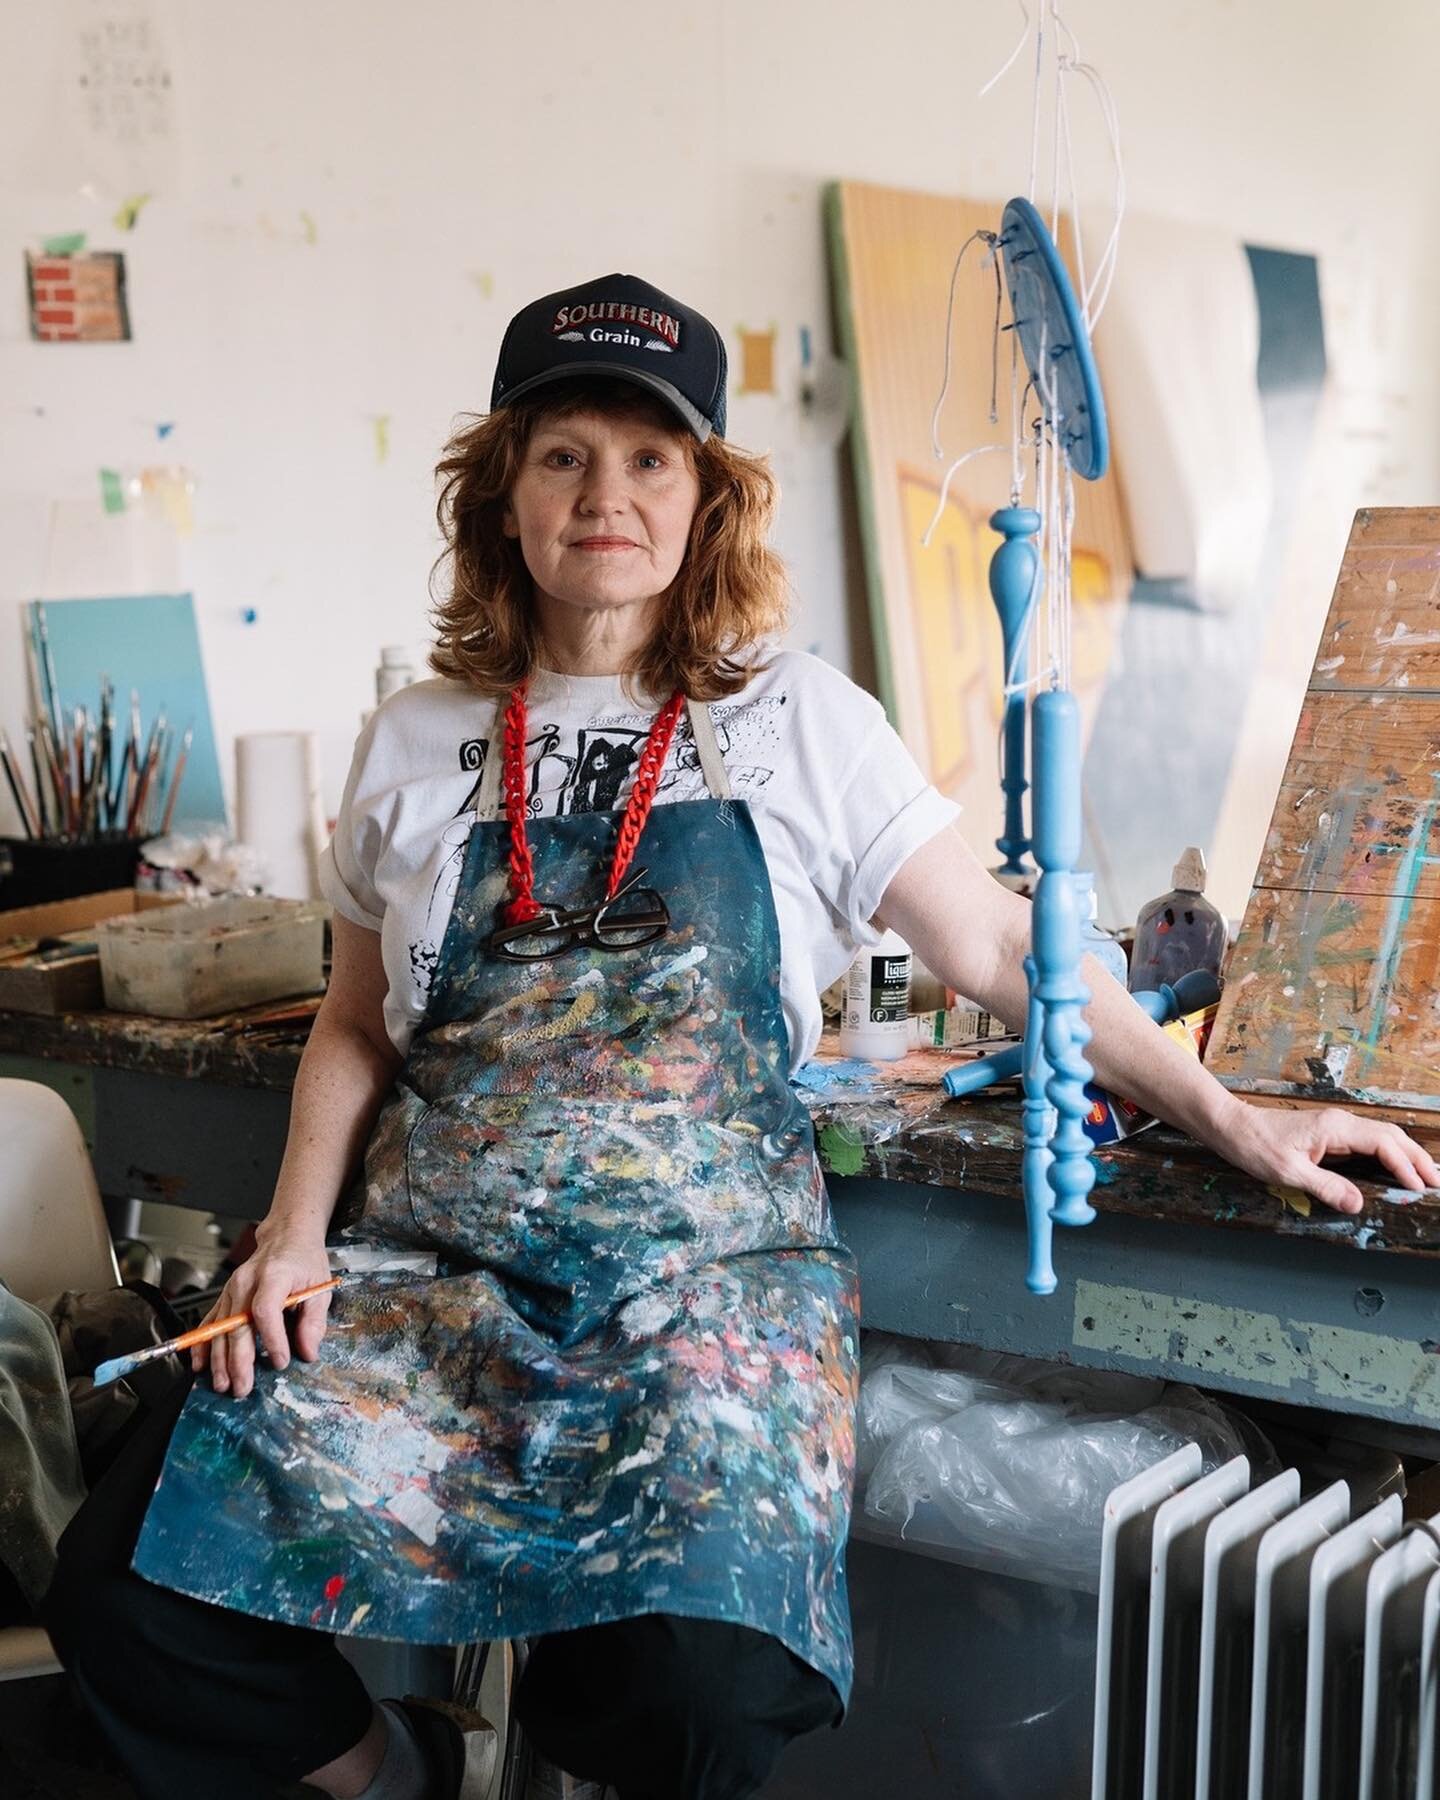 I popped in to see Nadine Christensen&rsquo;s exhibition at Buxton Gallery and I feel so very privileged having been able to meet Nadine and capture her image whilst she worked on some of the incredible pieces. An exhibition that spans 20 years of Na